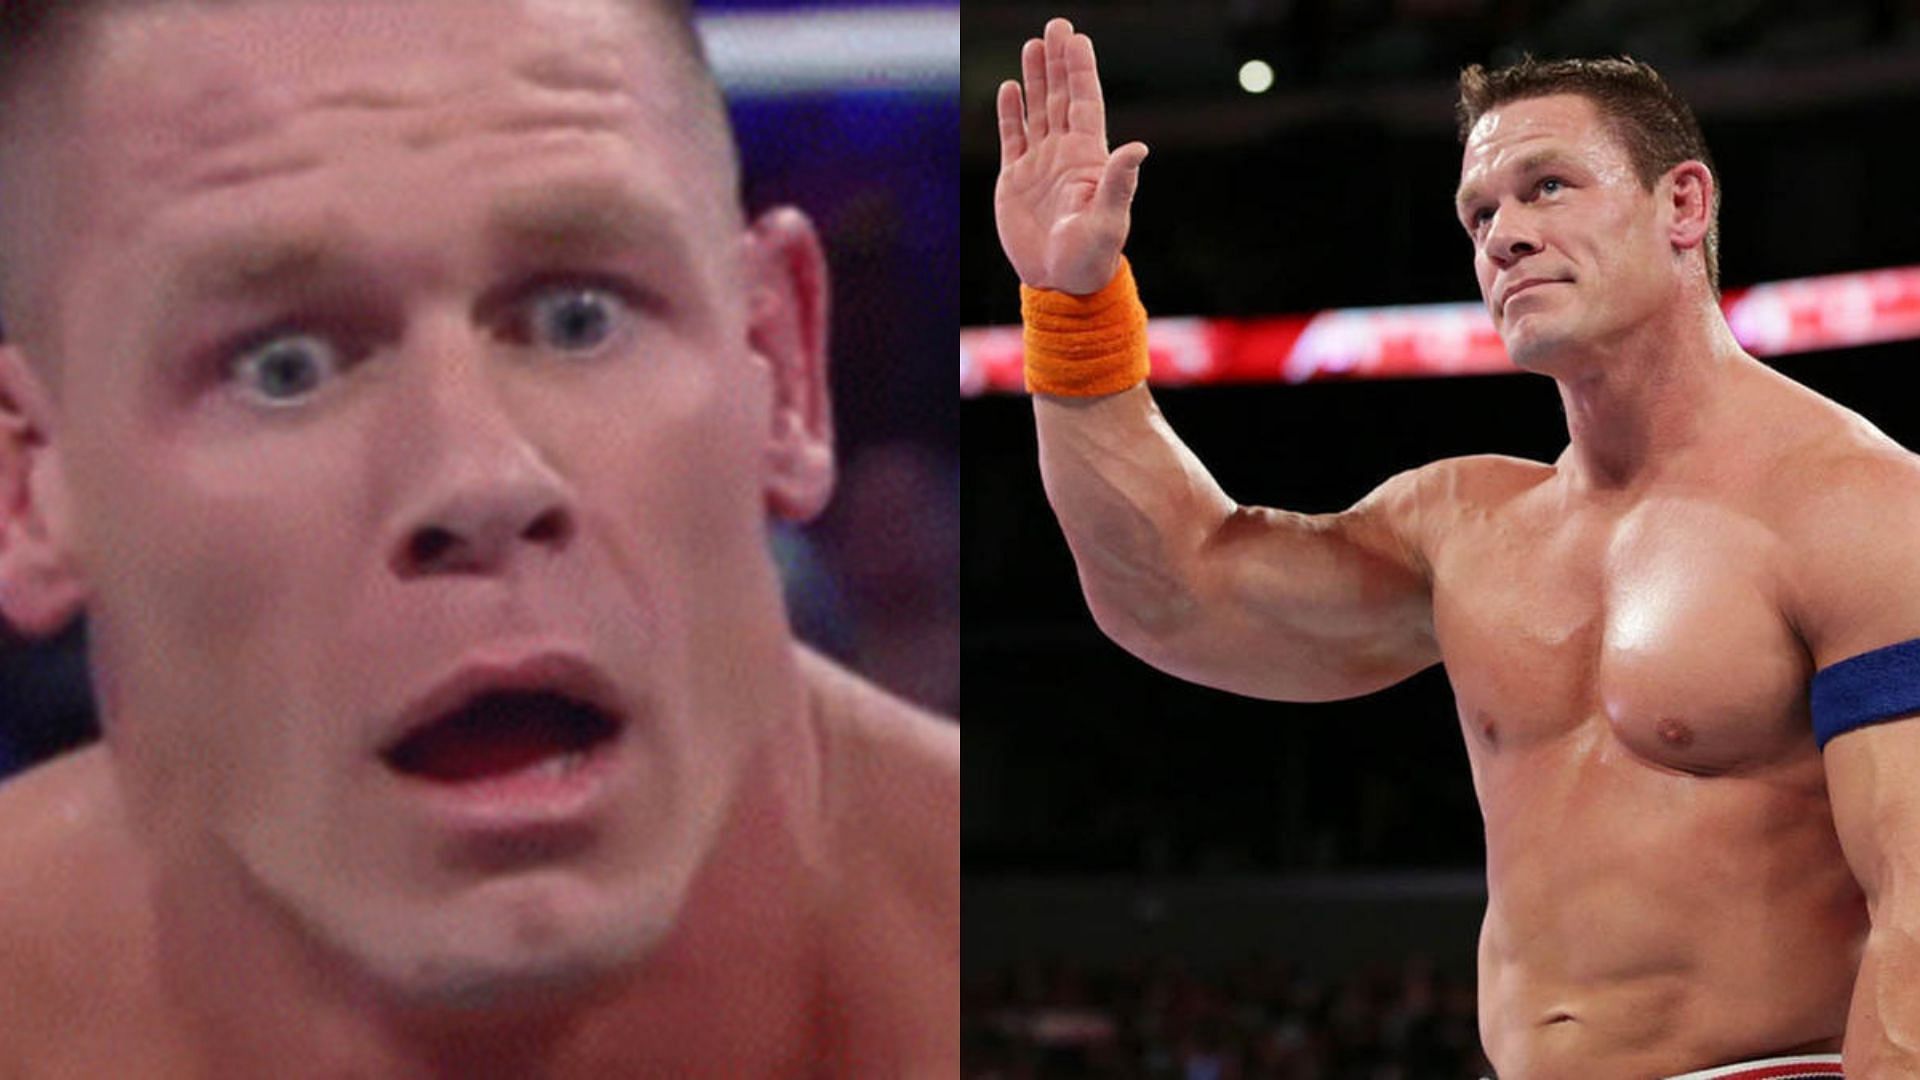 John Cena is currently absent from in-ring action in WWE